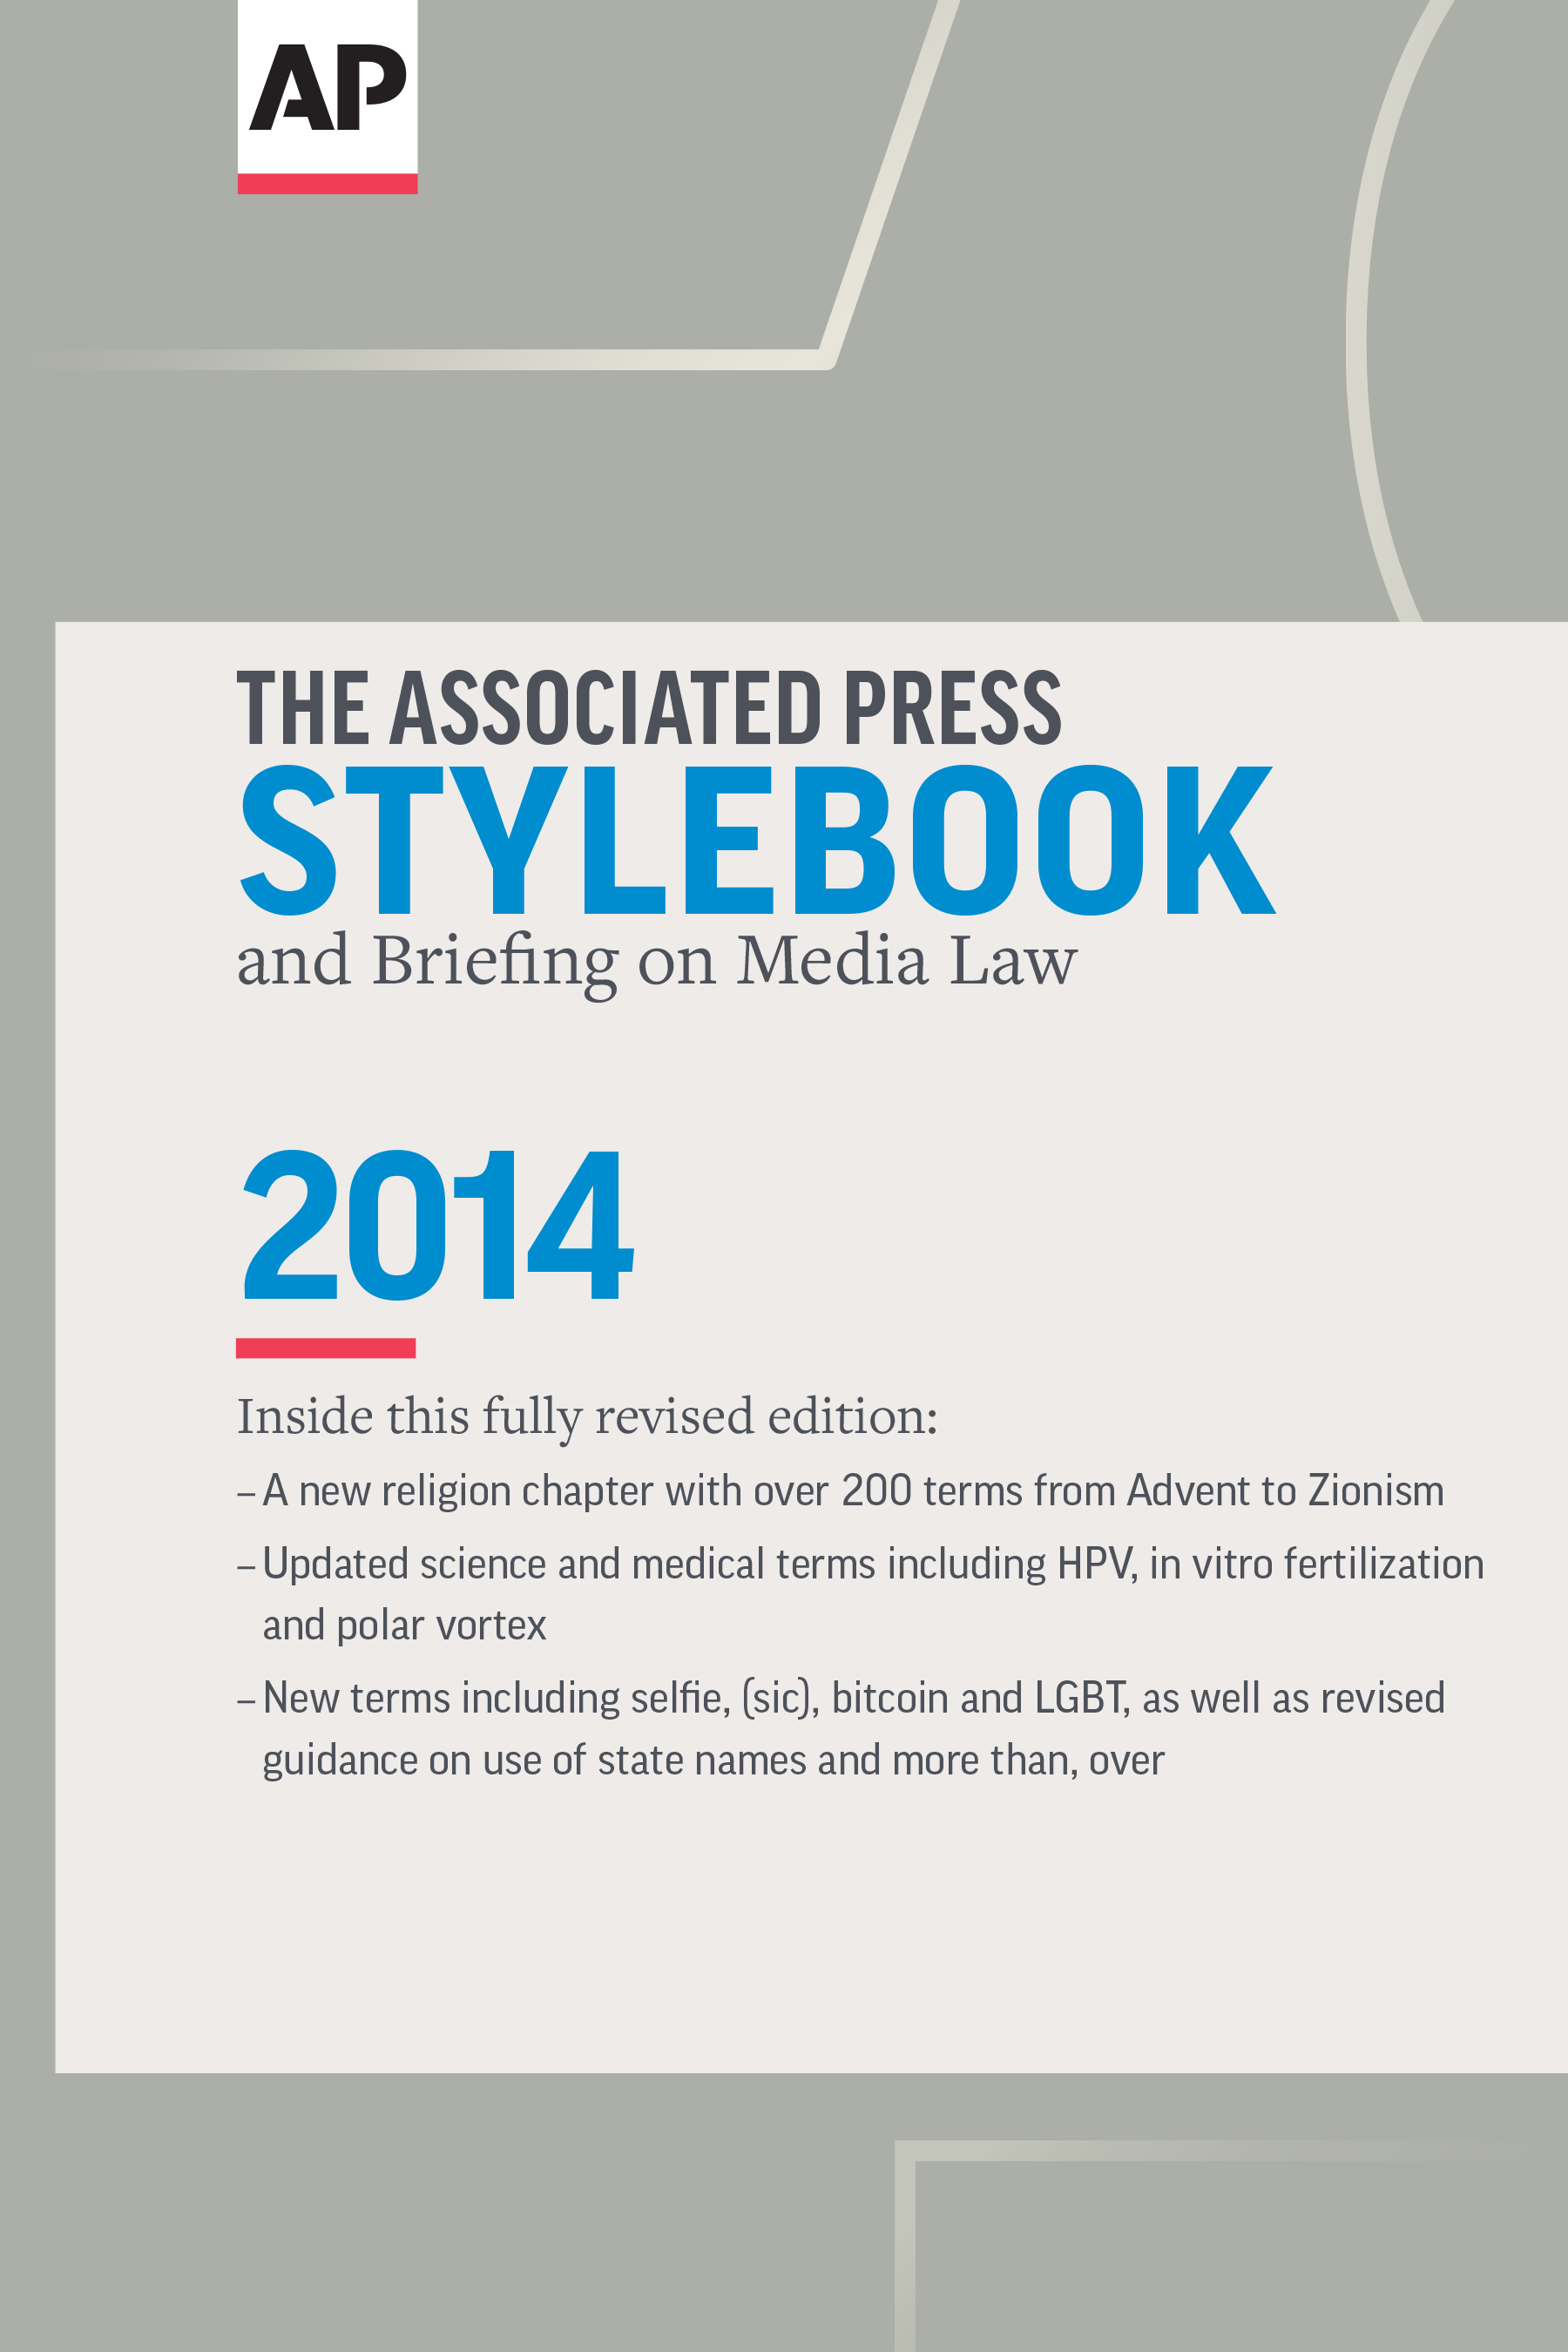 The Associated Press Stylebook 2014 and Briefing on Media Law